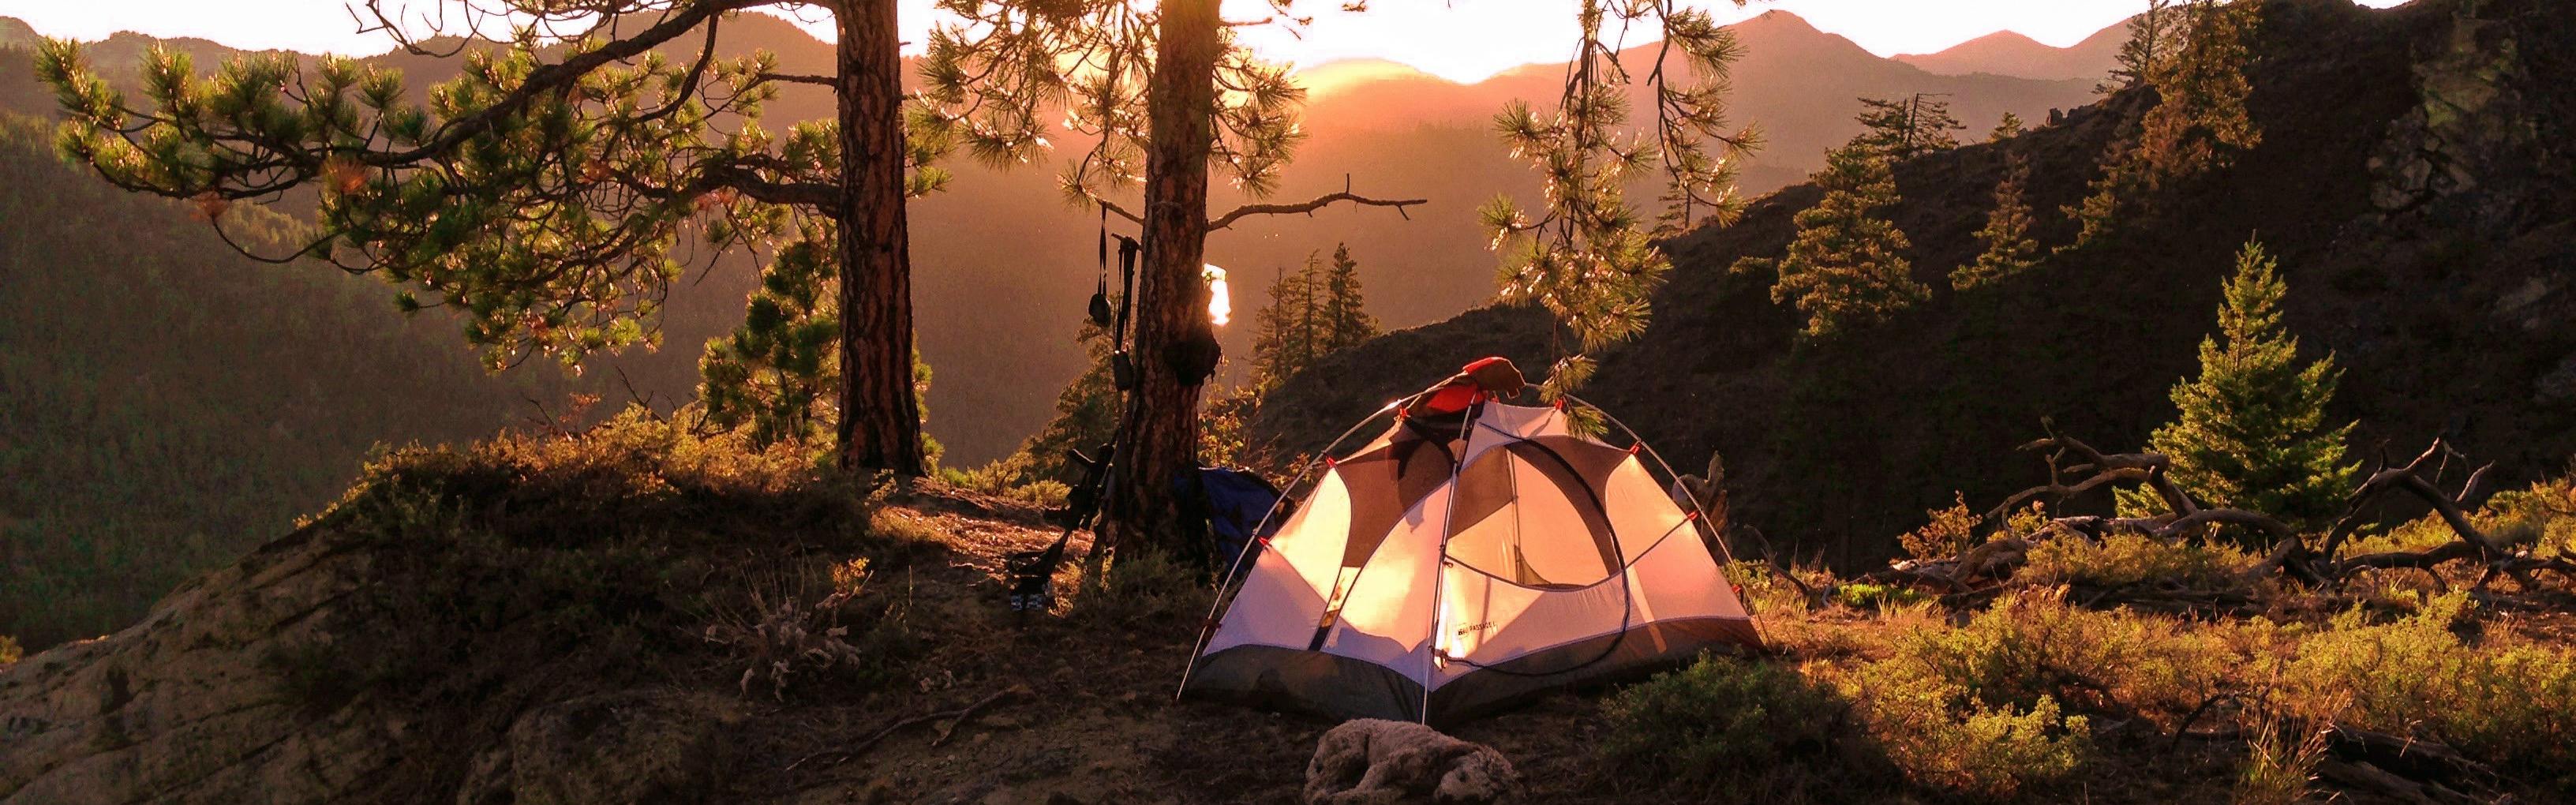 A tent is illuminated by the sun on a ridge.